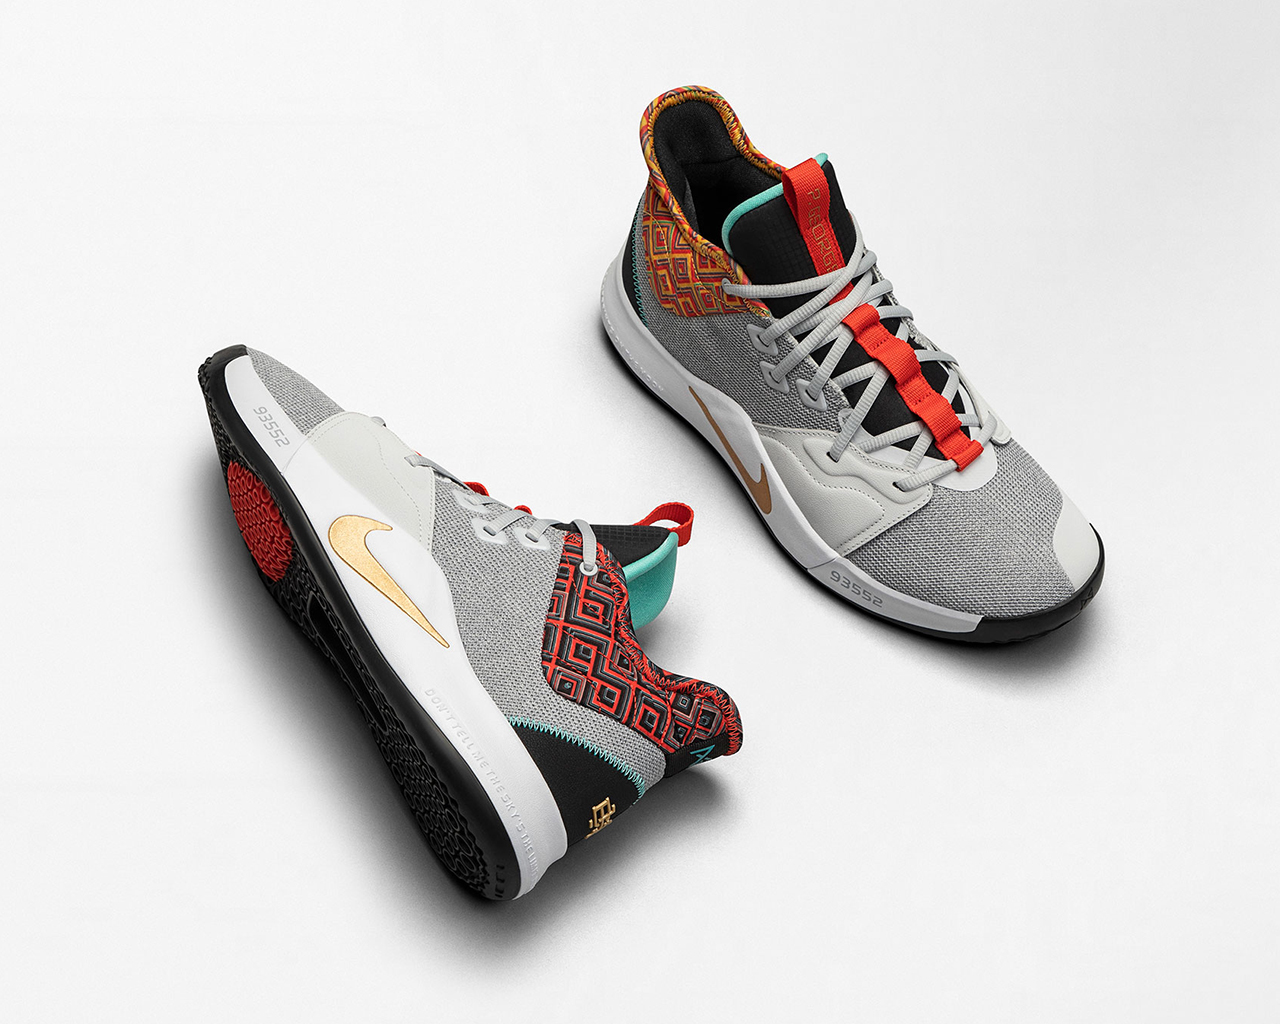 Nike Basketball Black History Month Collection 2019 - #MDGSportstyle